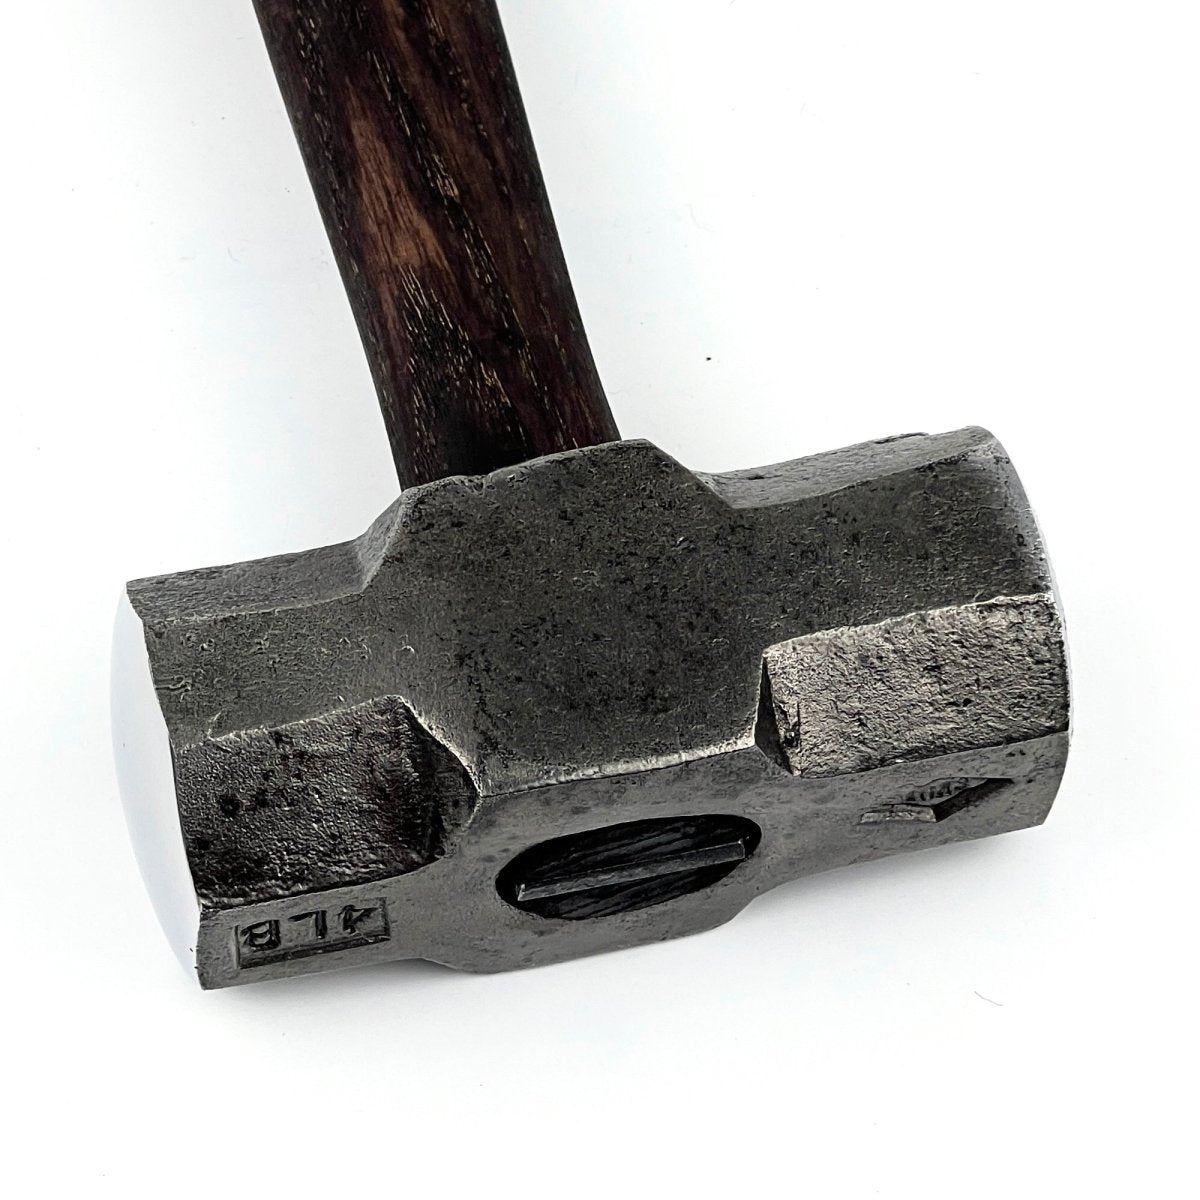 Double headed round hammer with round flat faces - Blacksmith′s flat sledge hammer from AncientSmithy